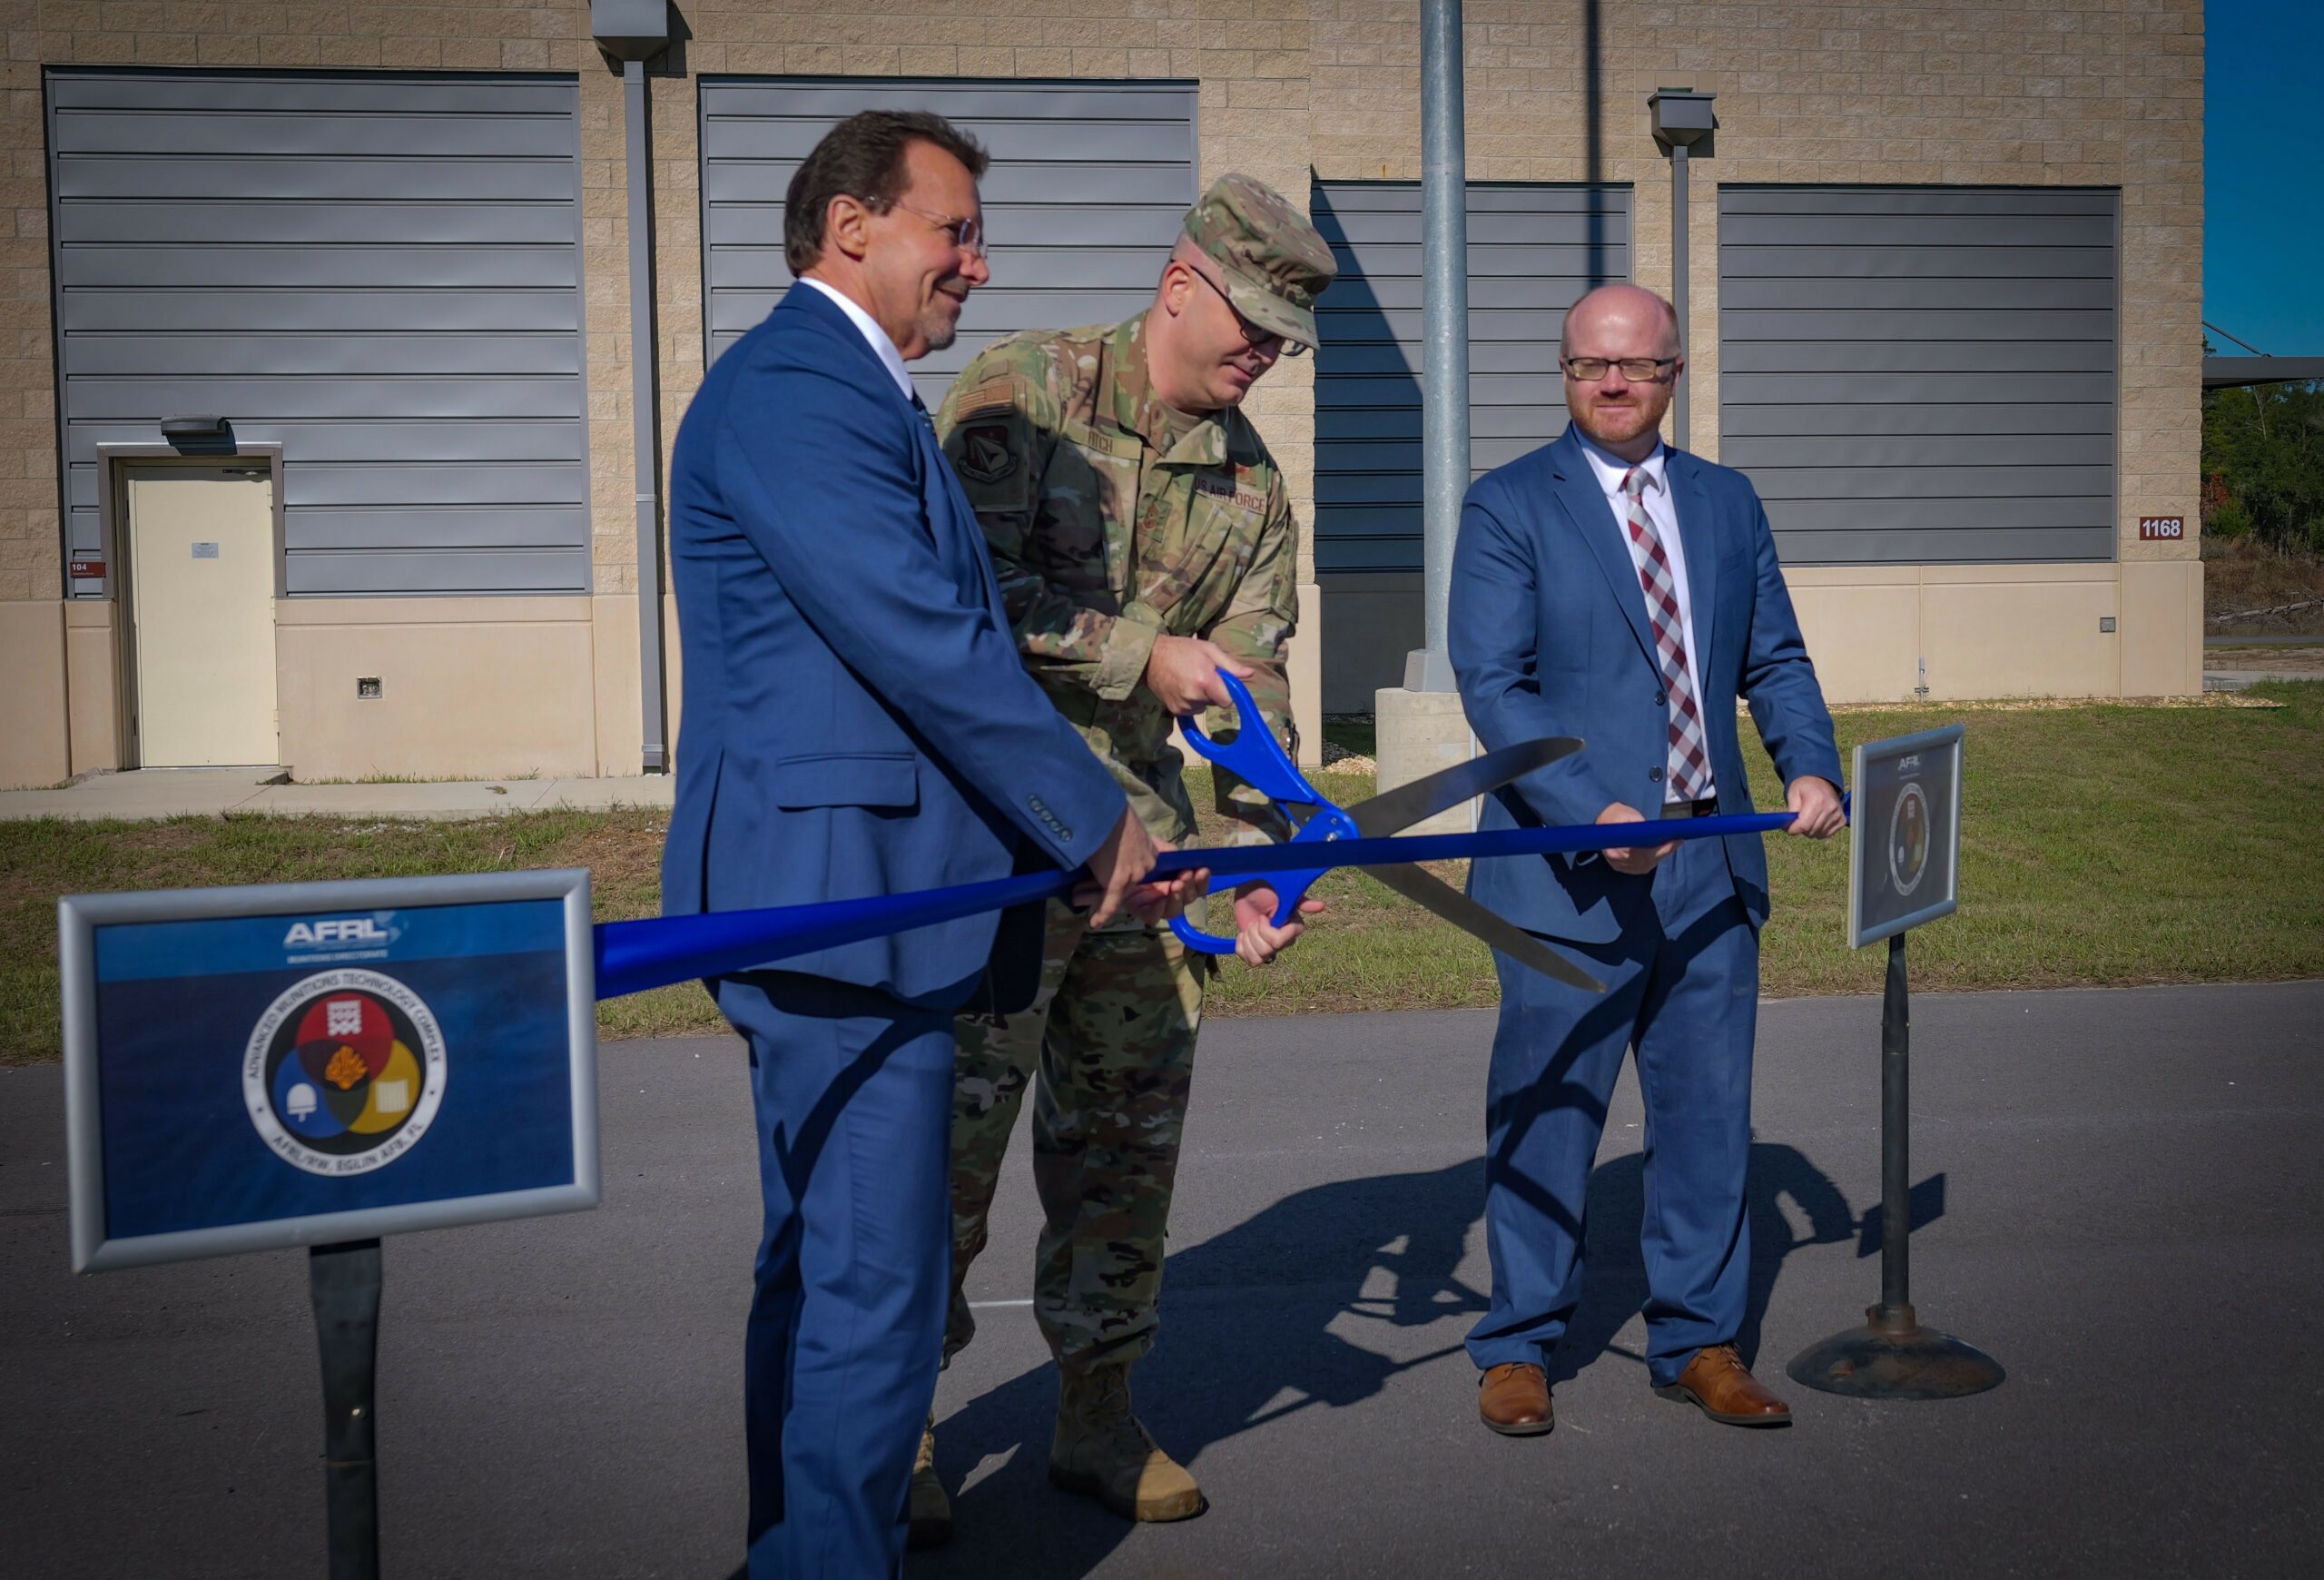 Ribbon-cutting ceremony for the AFRL's new Advanced Munitions Technology Complex at Eglin Air Force Base, Florida, December 2022.